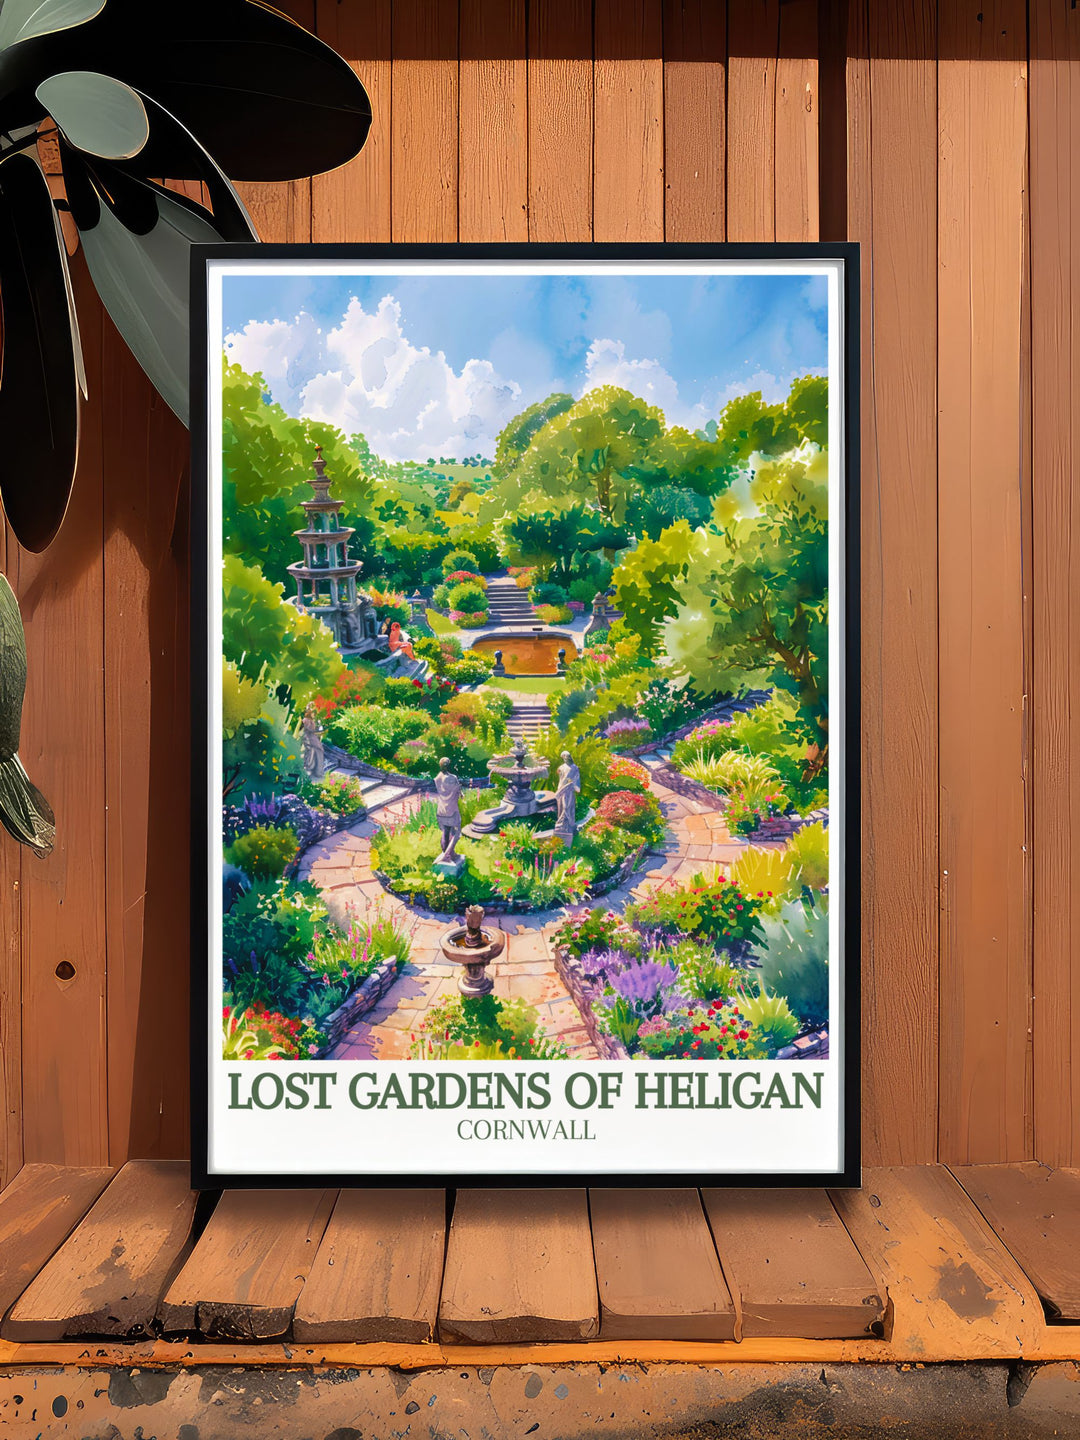 Inspiring Eden Project Poster highlighting the unique architecture and tropical biomes of Cornwall's renowned ecological site with Italian garden Productive gardens perfect for adding a touch of botanical splendor to your decor